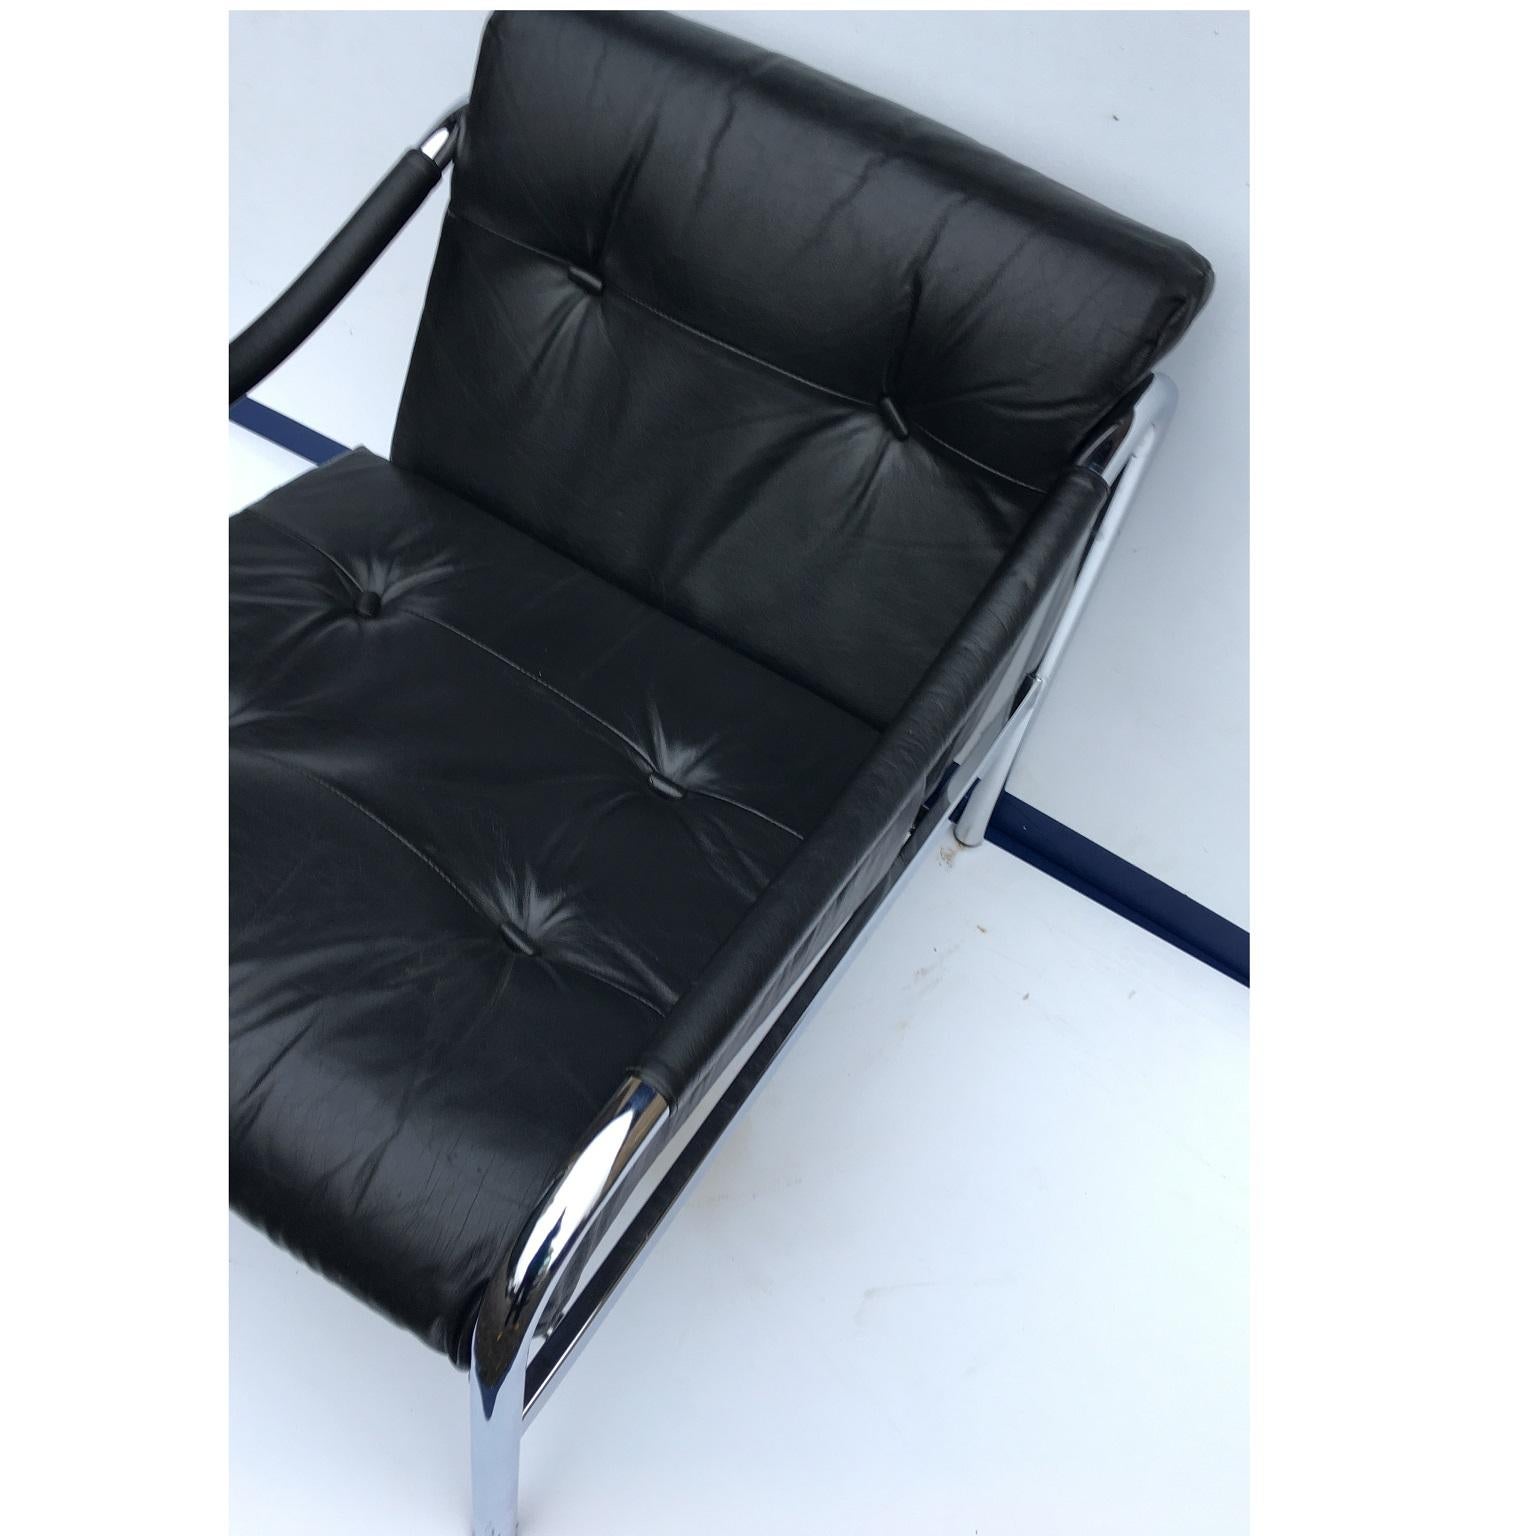 Late 20th Century Black Leather Pieff Chair Designed by Tim Bates, England, circa 1970s